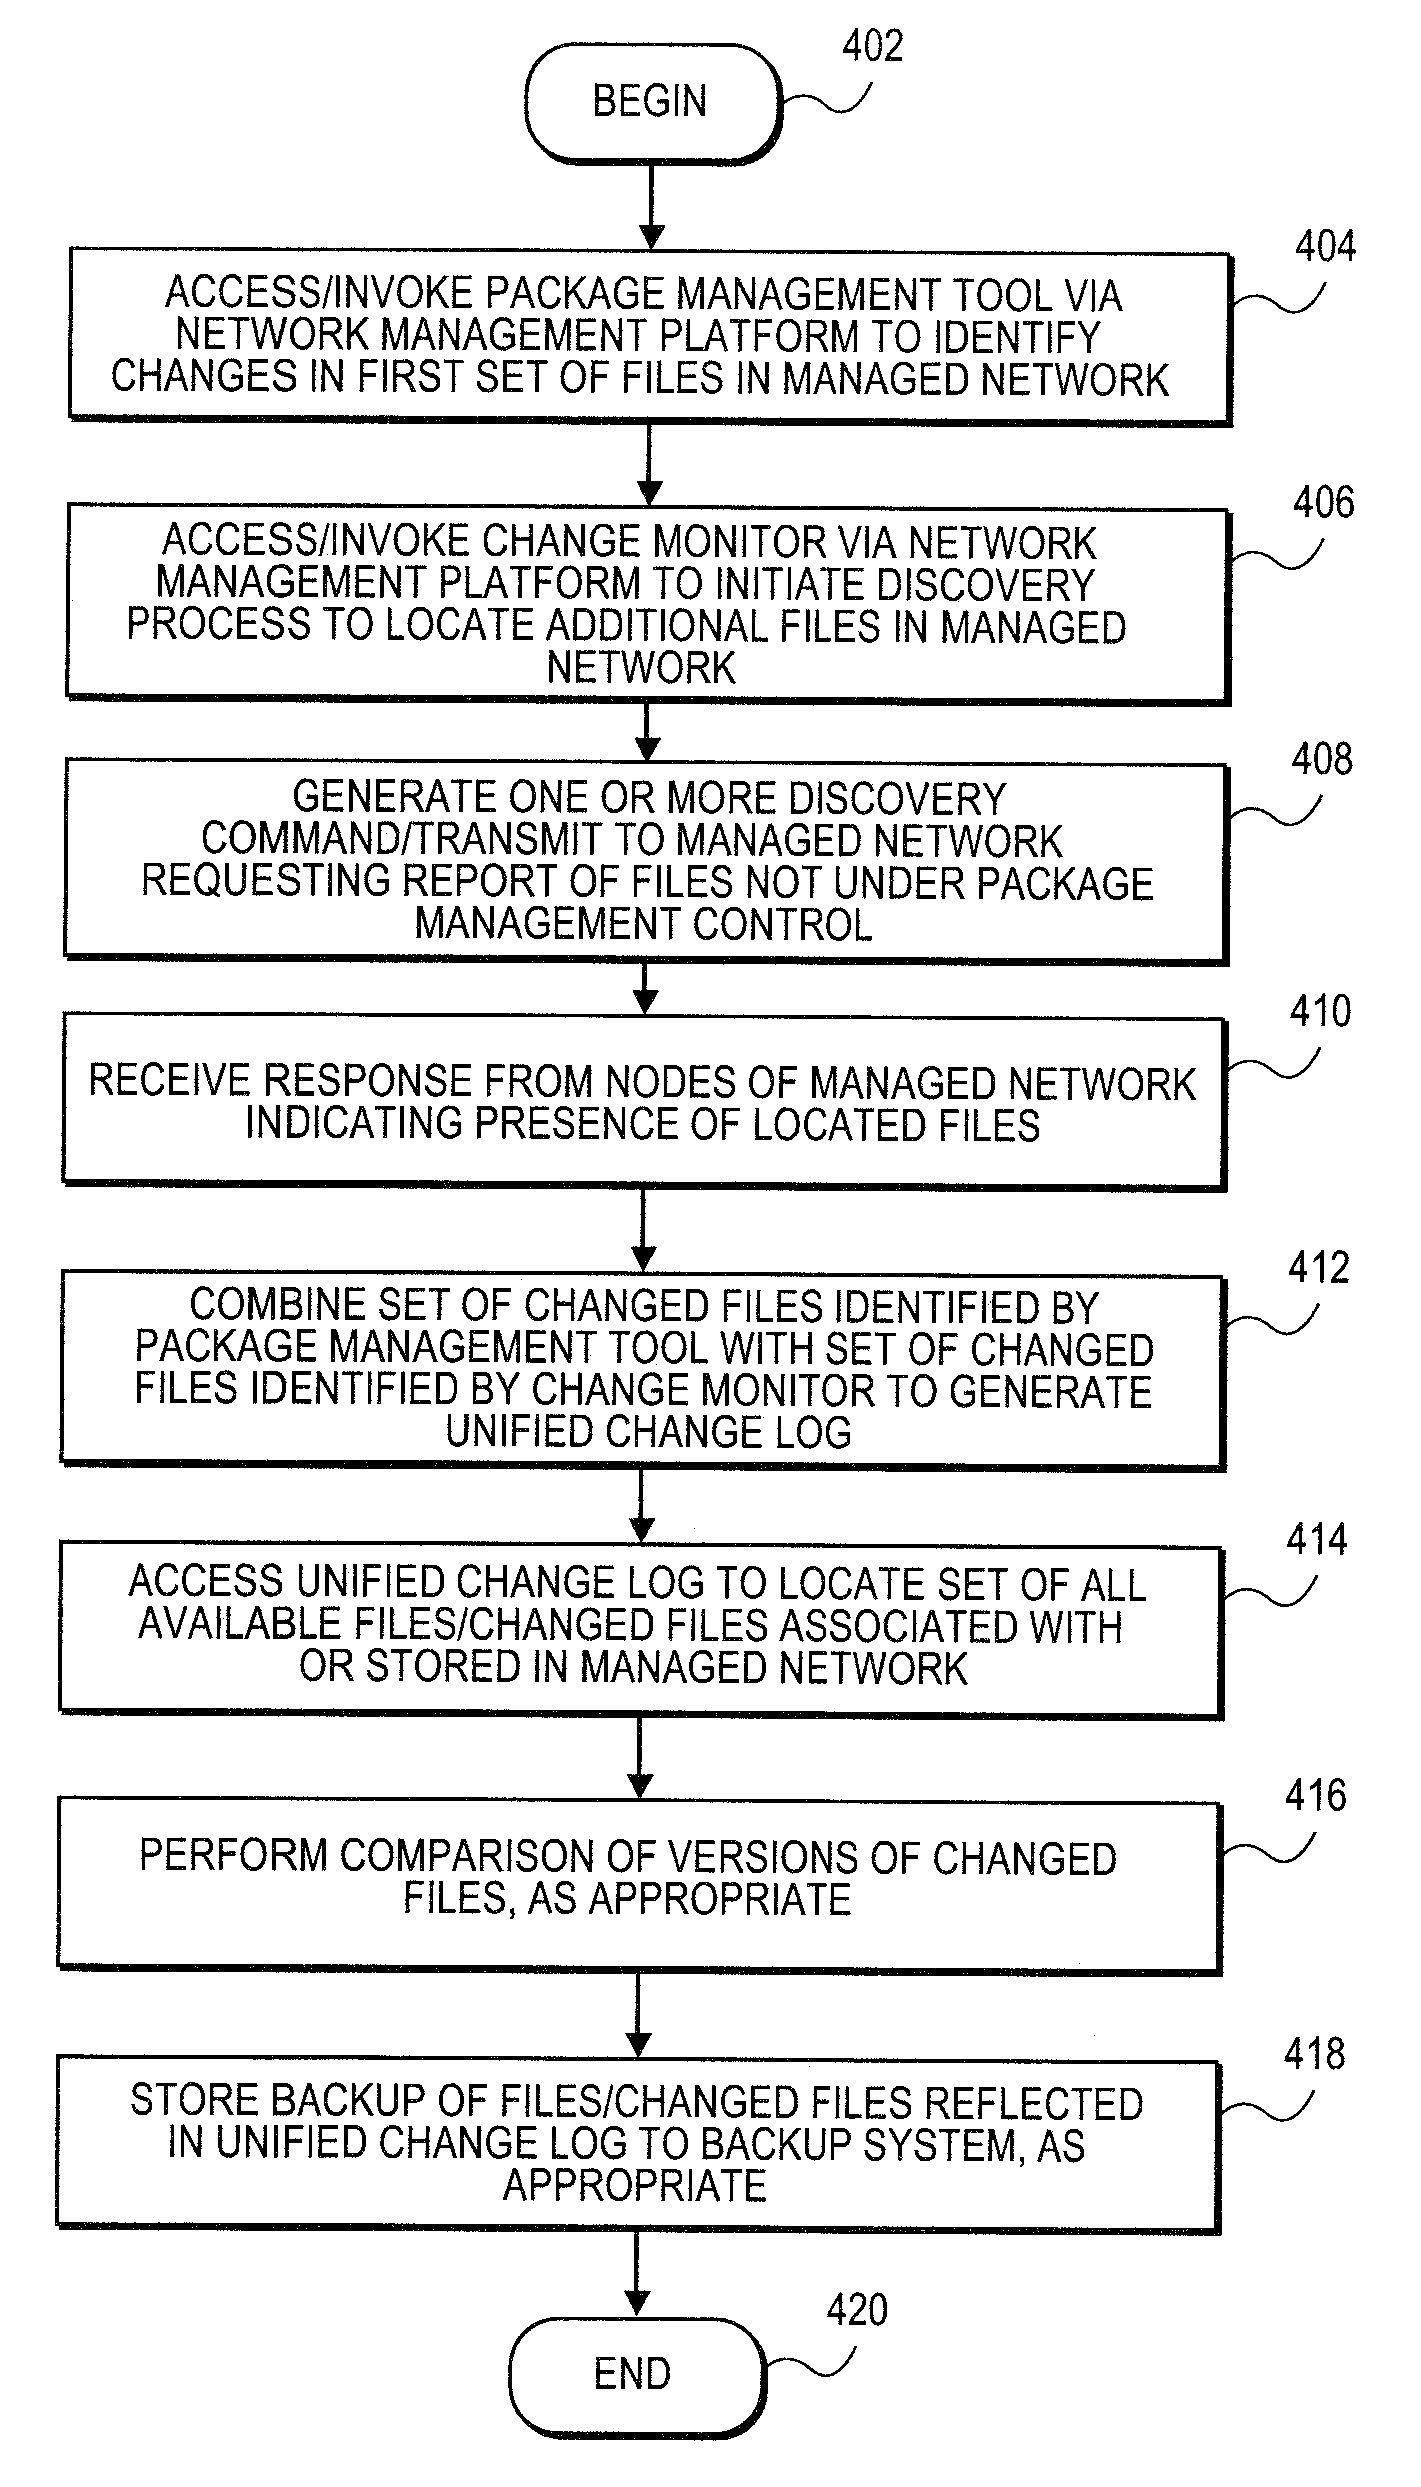 Systems and methods for generating a change log for files in a managed network